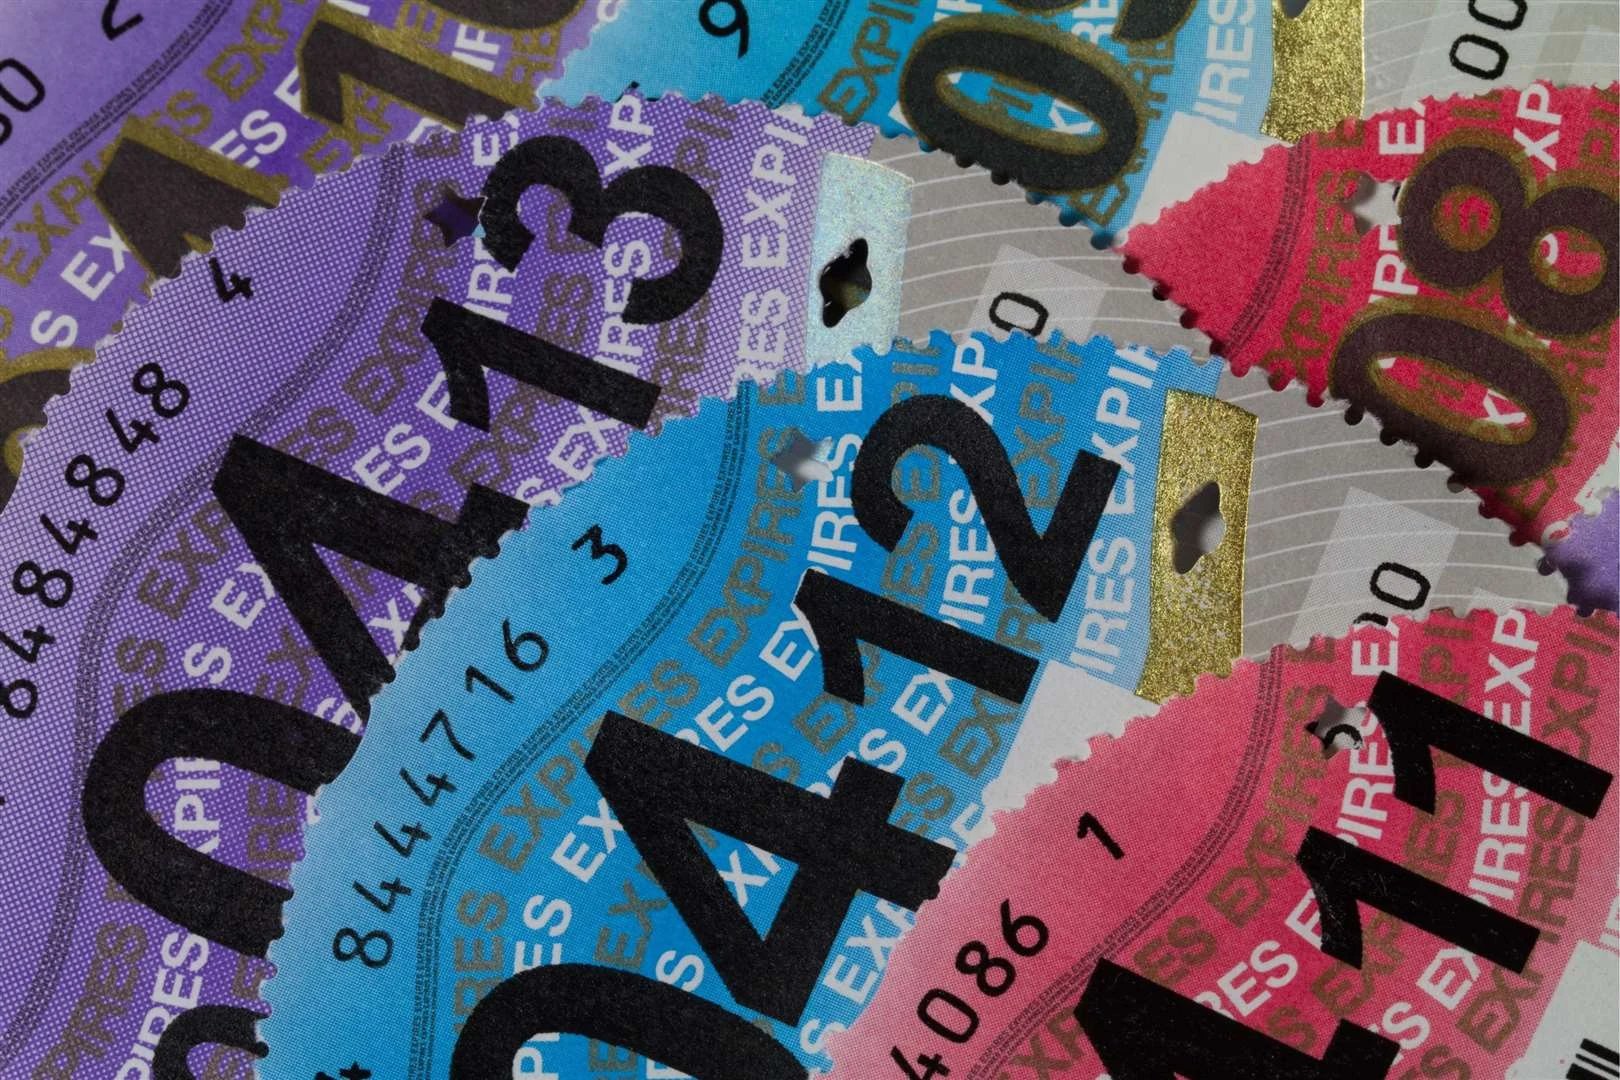 Cash In Old Vehicle Tax Discs